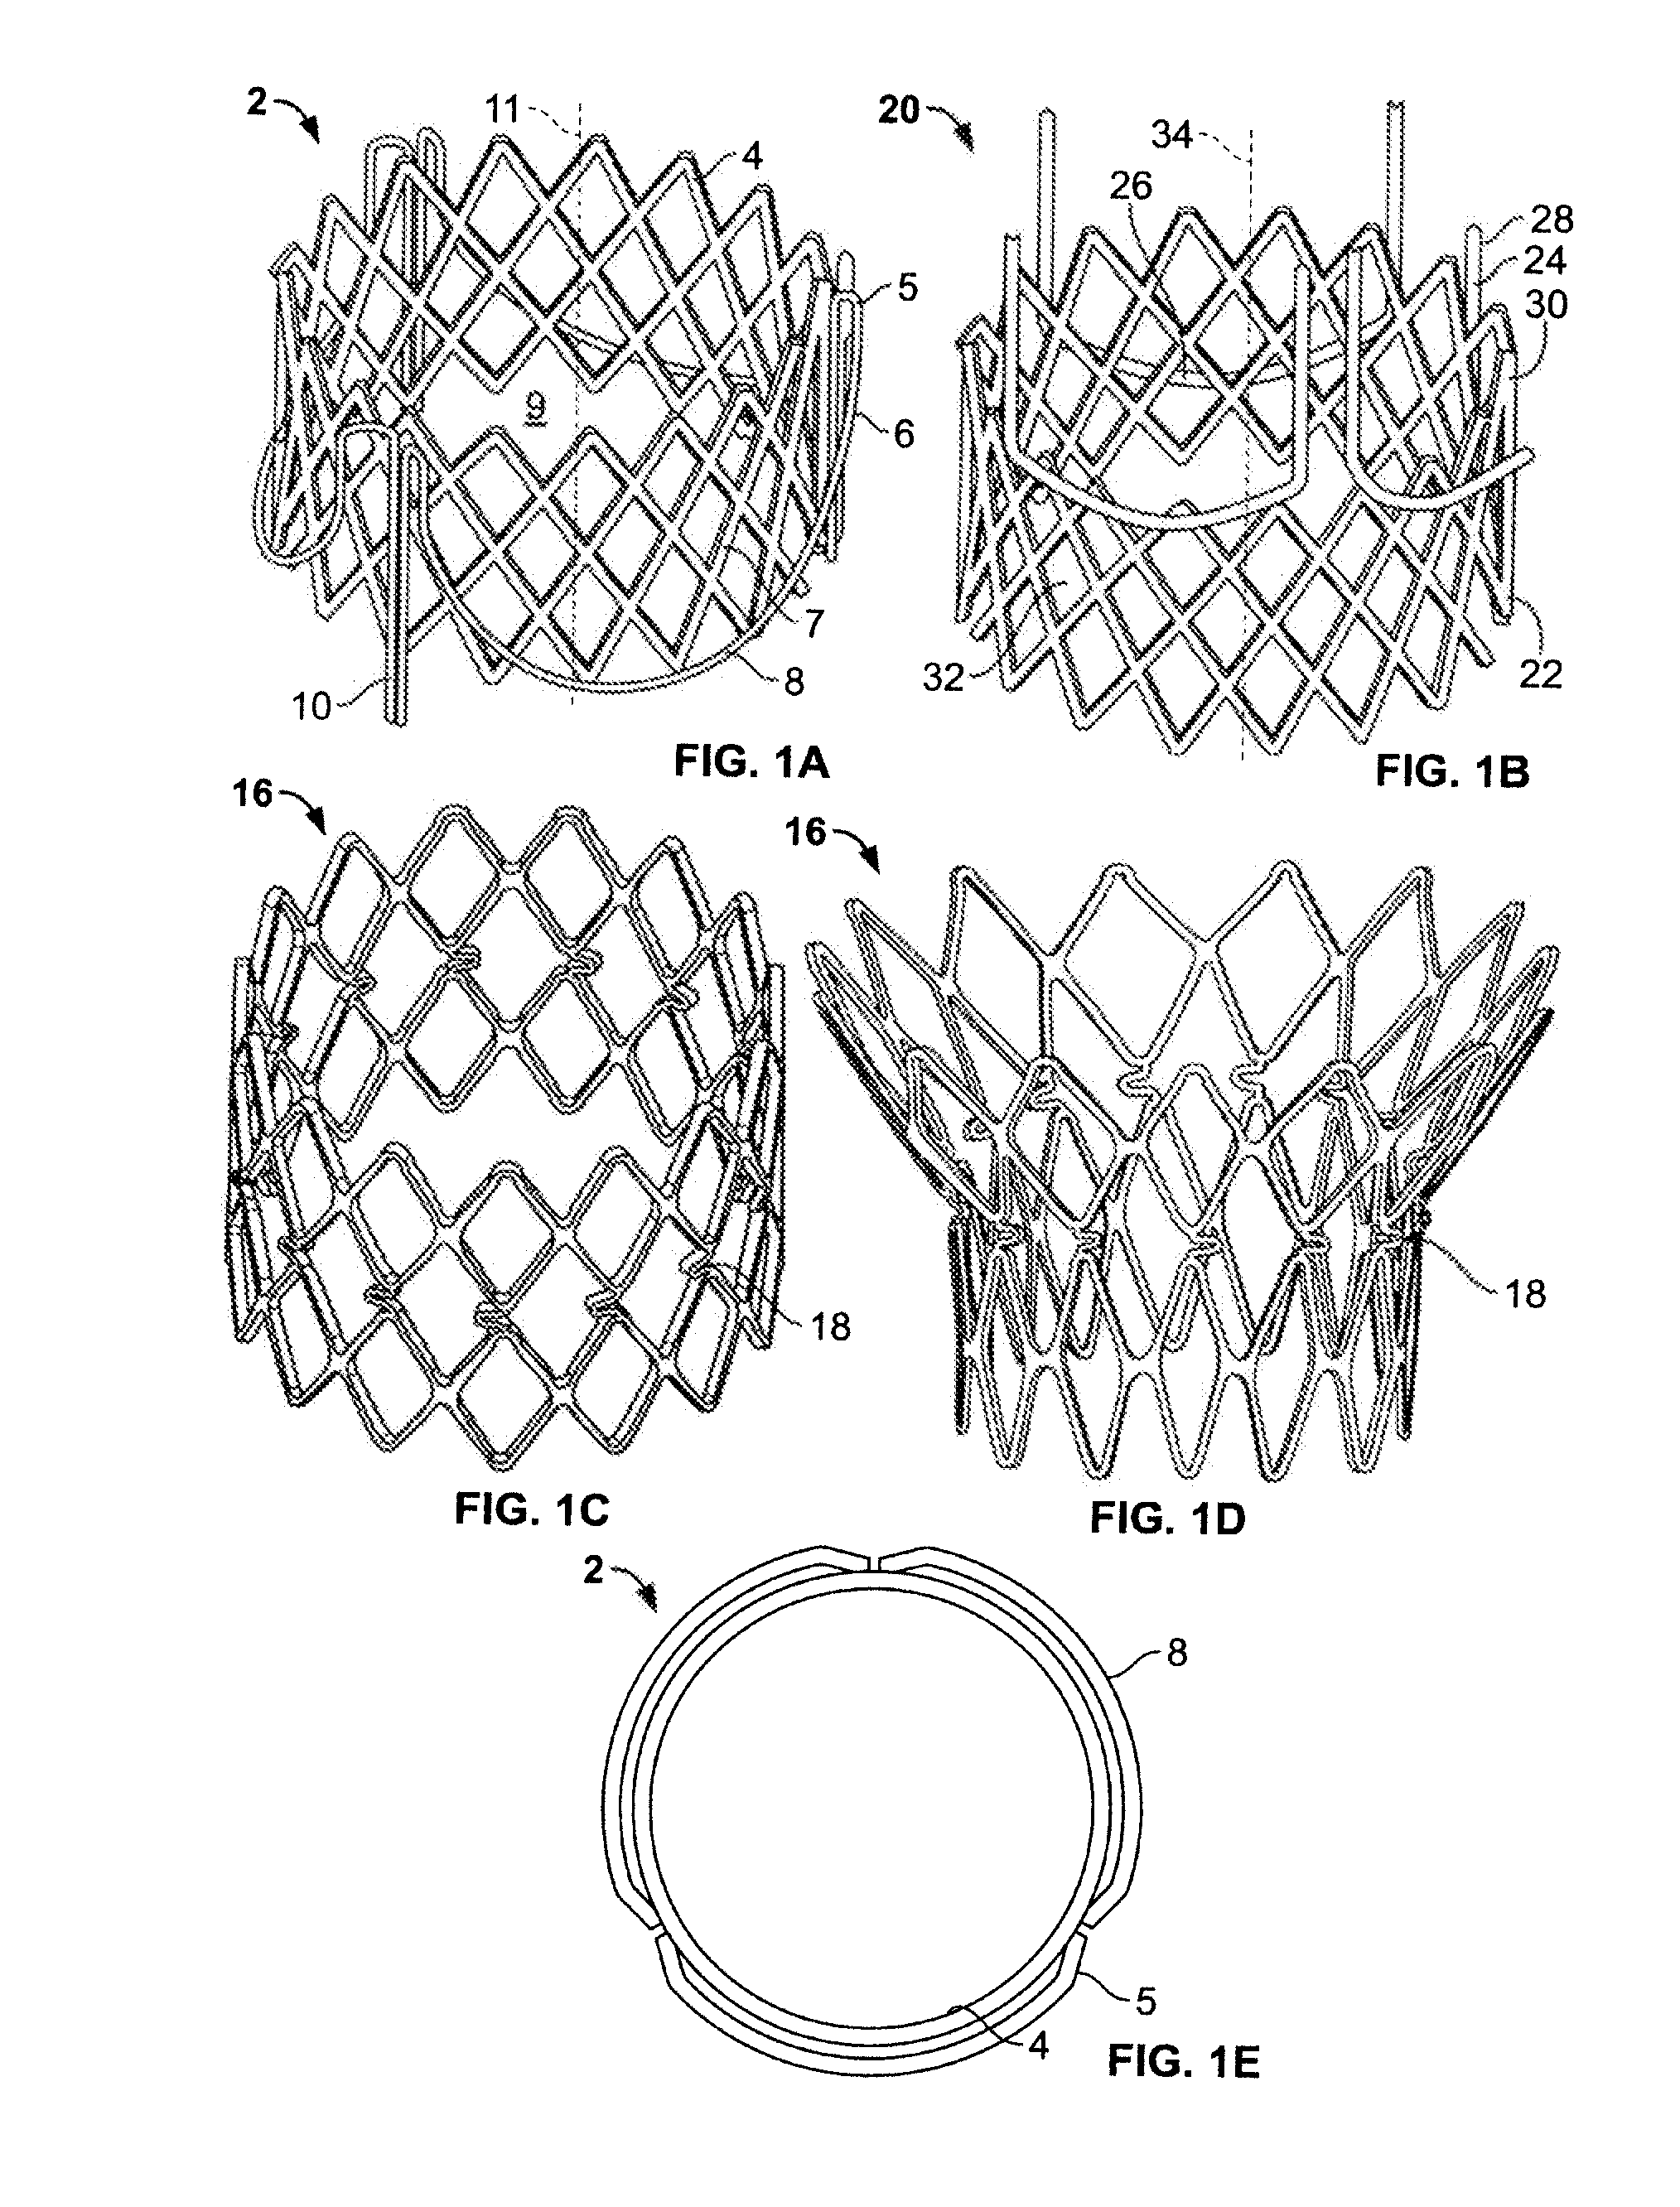 Methods for Delivery of a Sutureless Pulmonary or Mitral Valve